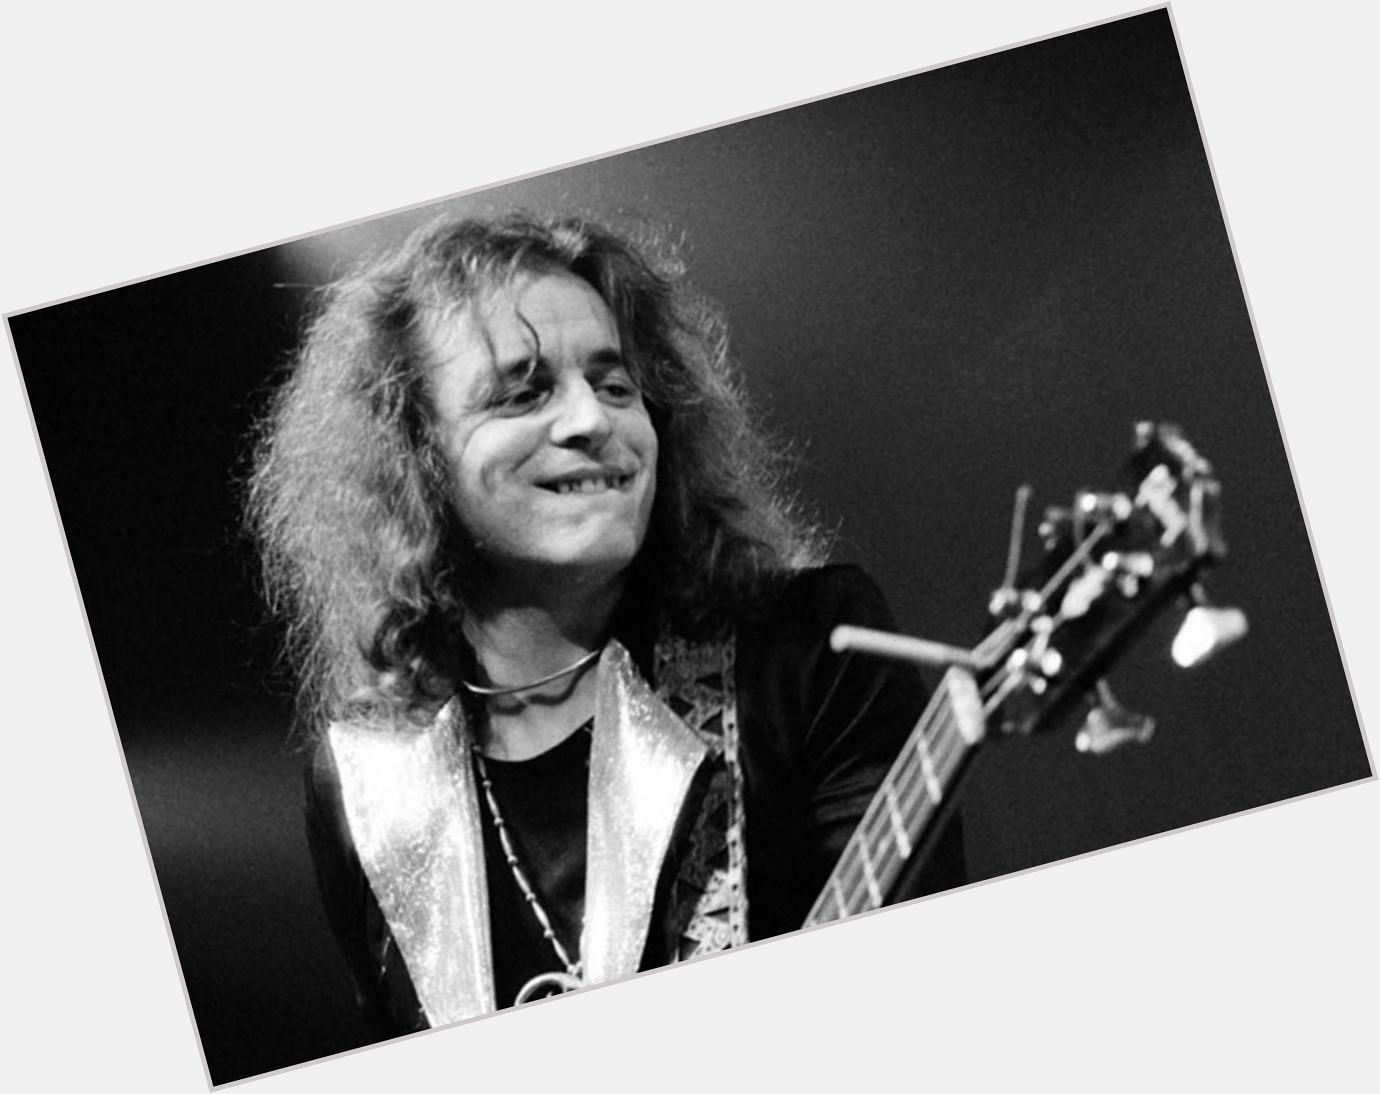 Happy Birthday to Jack Bruce of my favorite band Cream. My all-time favorite bass player. Rest in peace, mr. Bruce. 